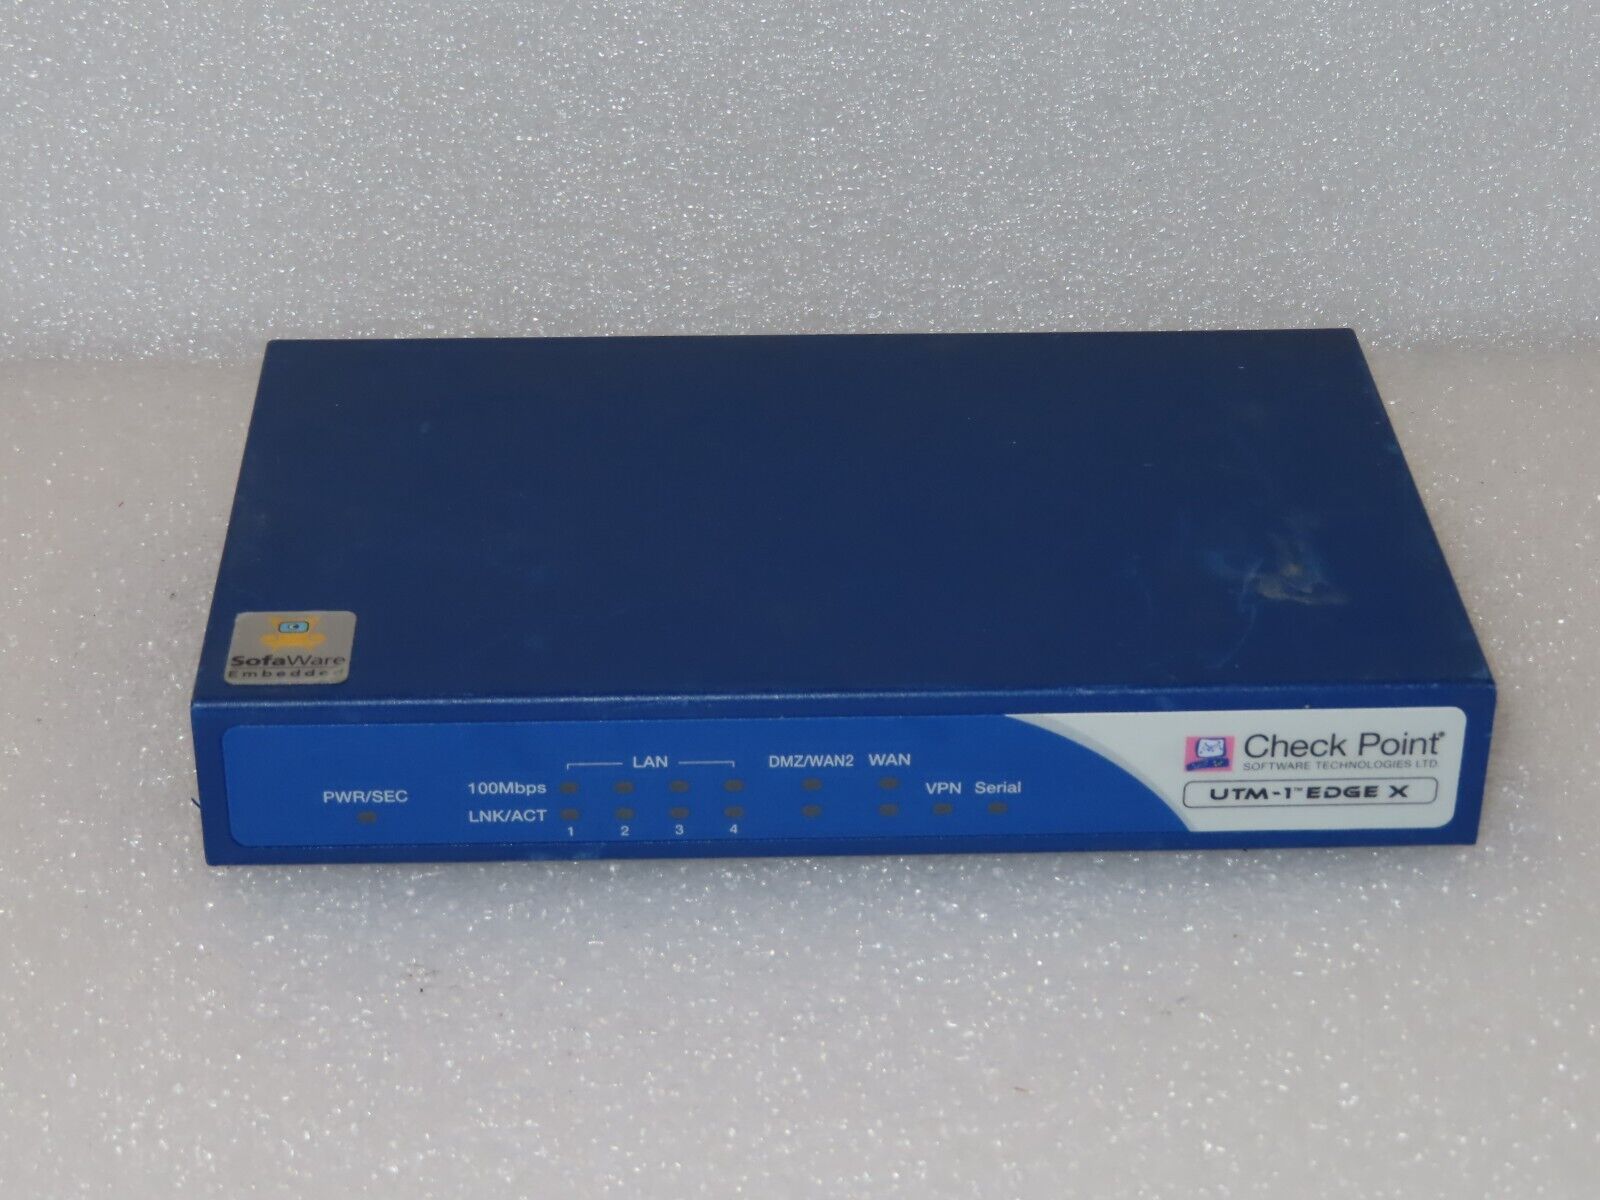 Check Point UTM-1 EDGE X Internet Security Appliance ** no adapter